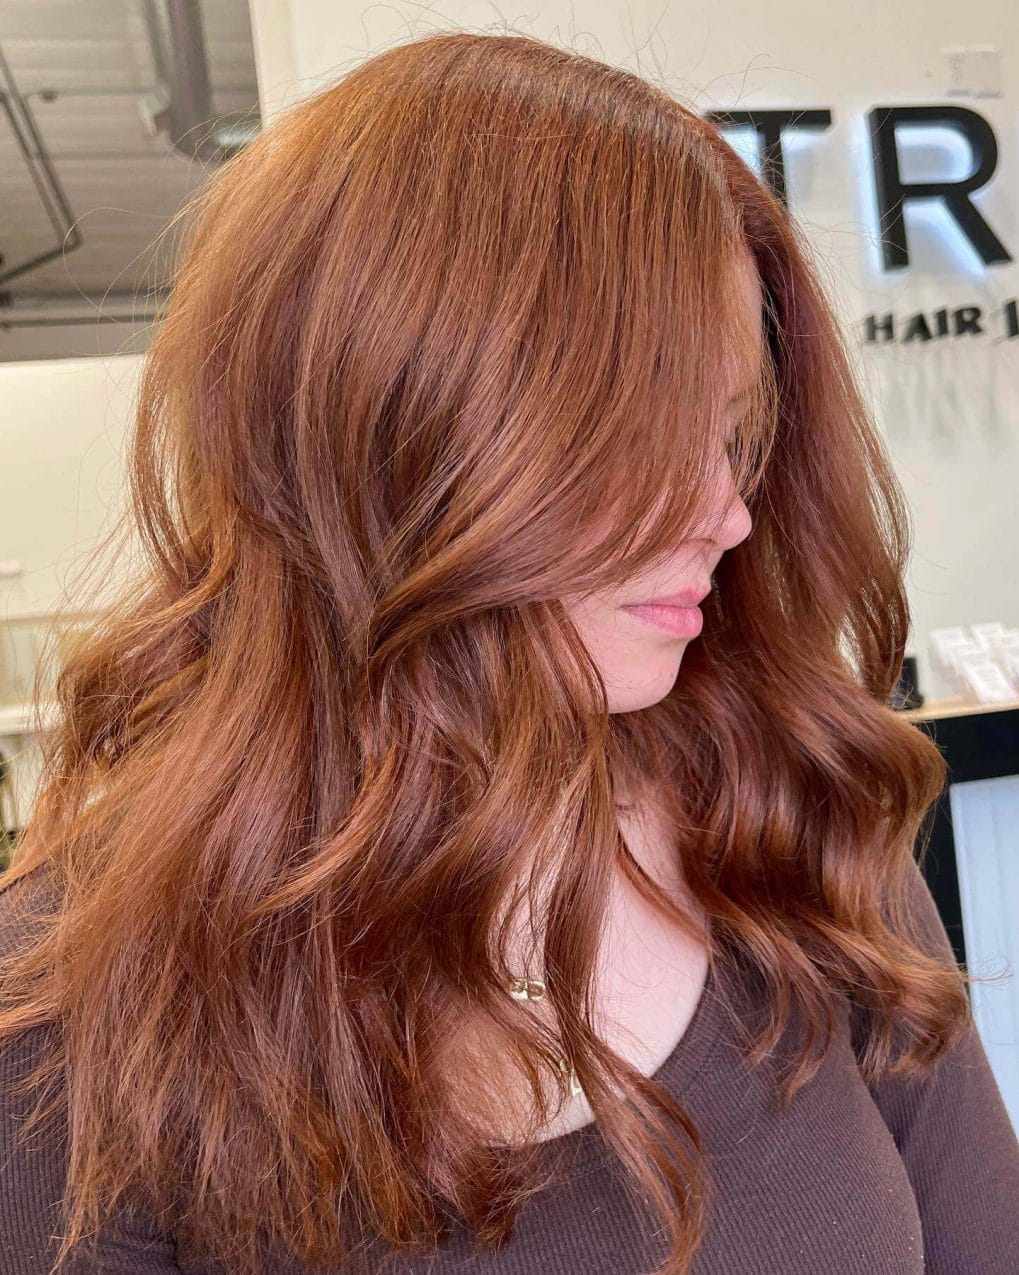 Uniform copper tone hair with long layers and side-swept style.